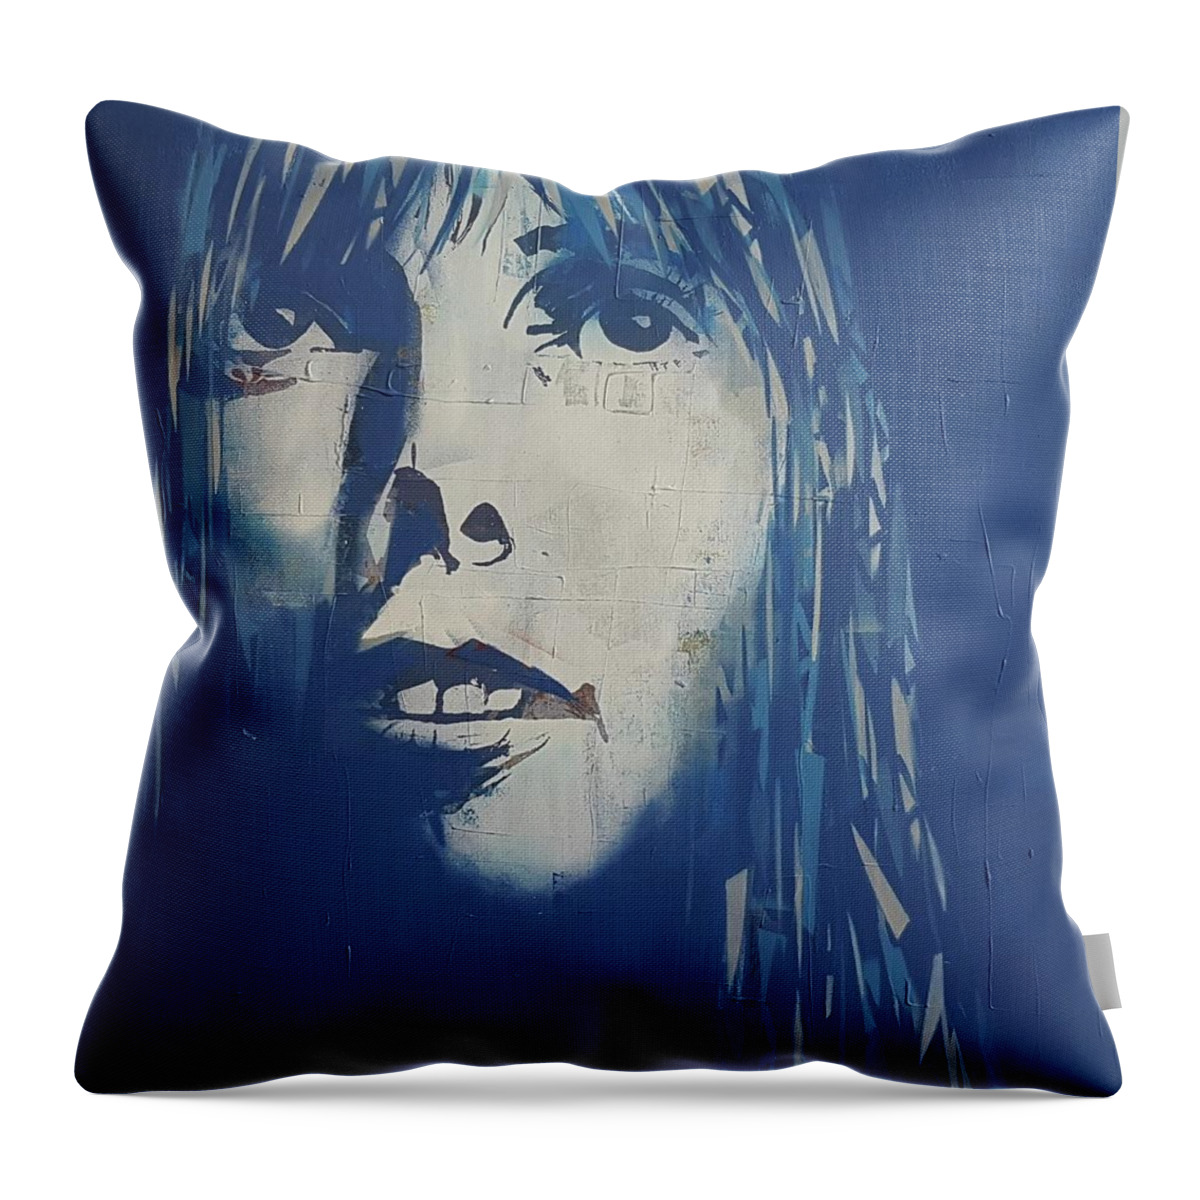 Joni Mitchell Throw Pillow featuring the painting Blue - Joni Mitchell by Paul Lovering